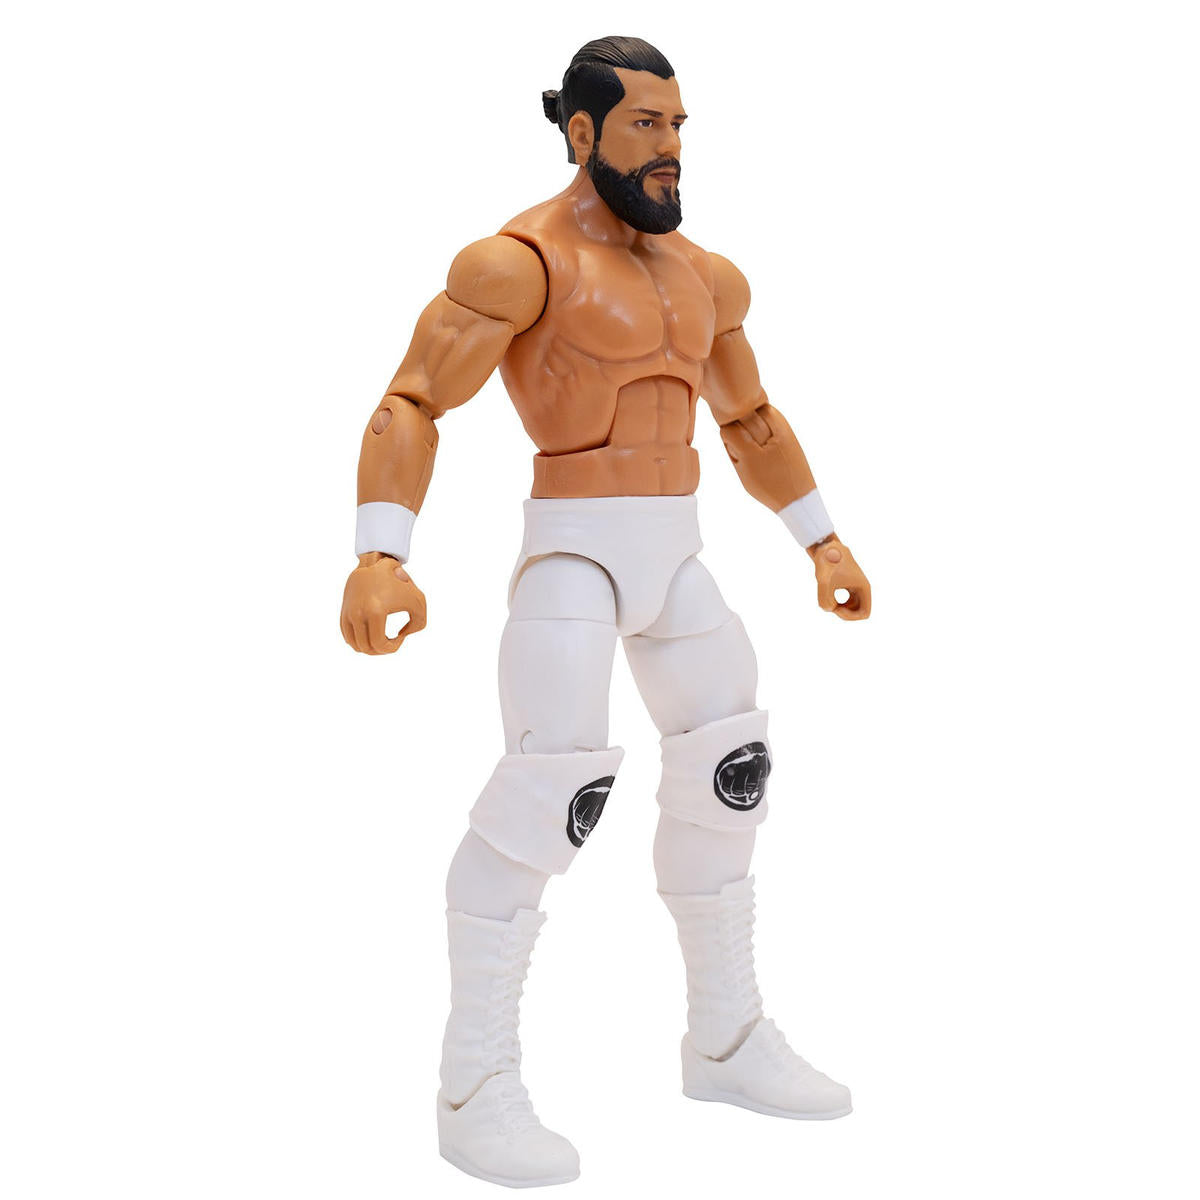 2019 WWE Mattel Elite Collection NXT Takeover Series 5 Andrade "Cien" Almas [Exclusive]